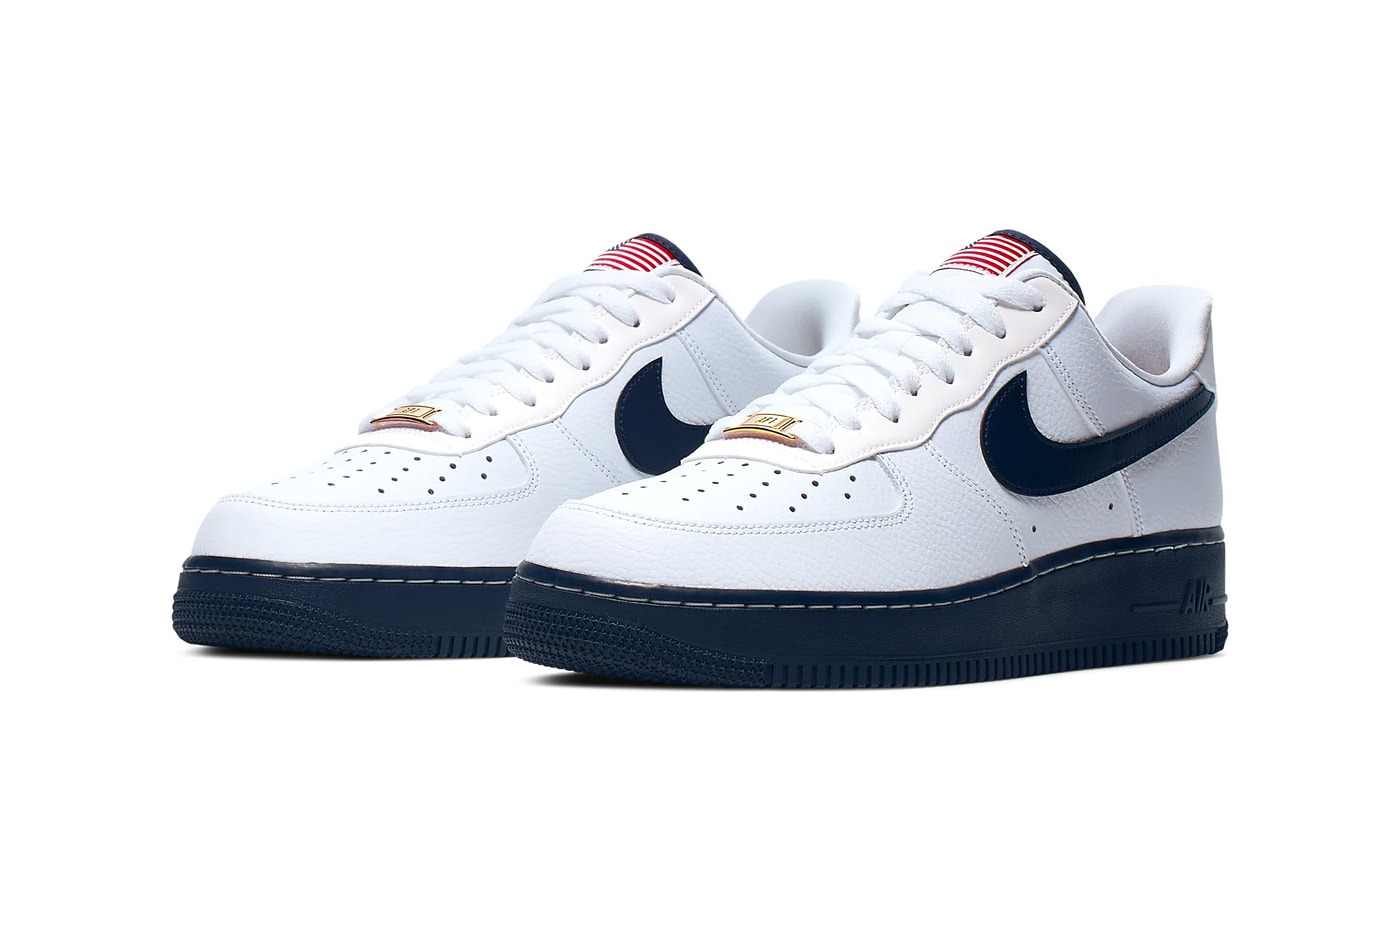 Red and Navy Swooshes Appear on This Nike Air Force 1 '07 LV8